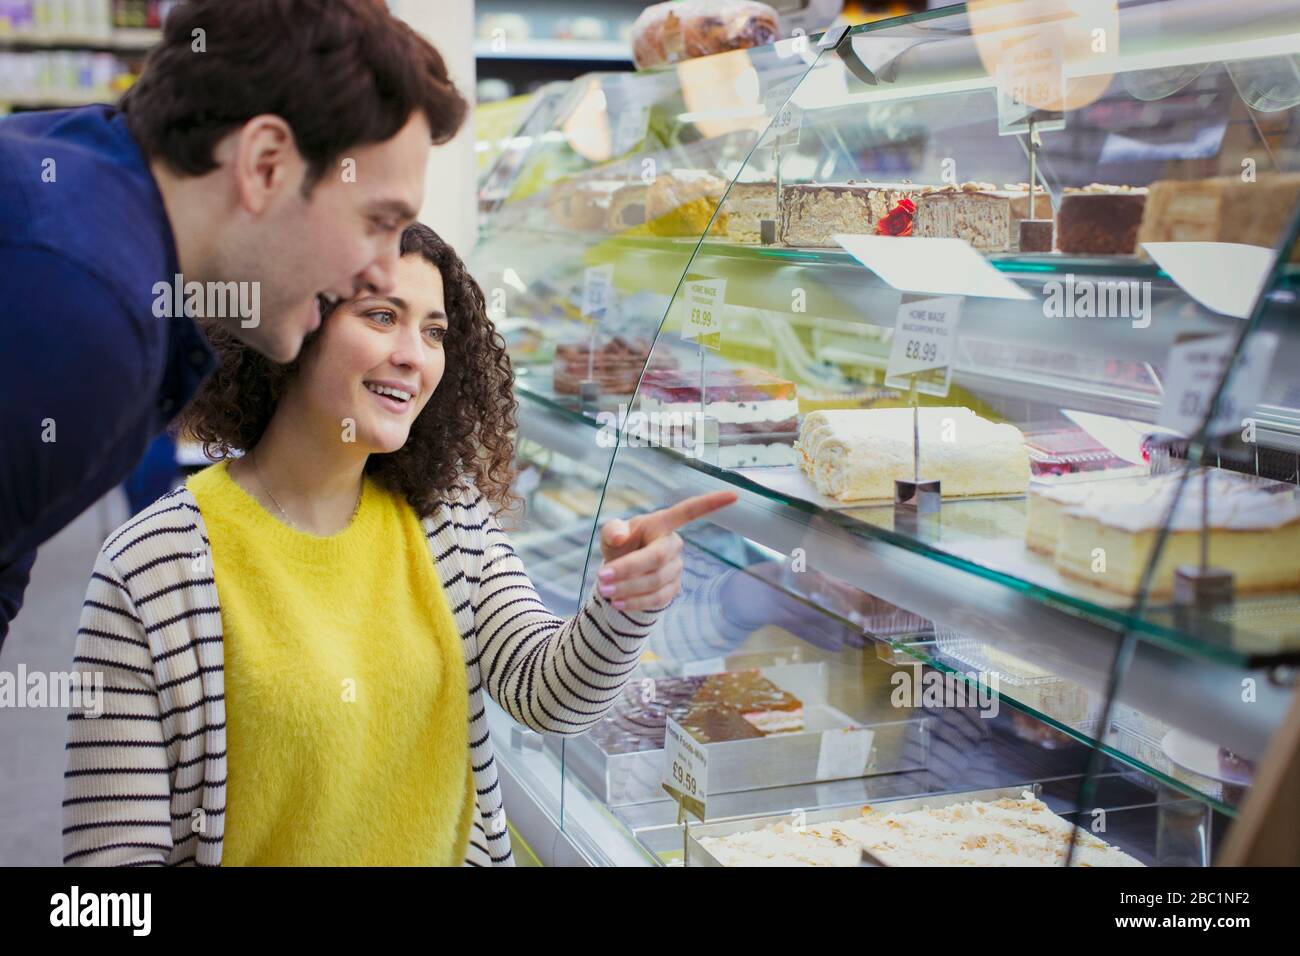 Couple looking at desserts in bakery display case Stock Photo